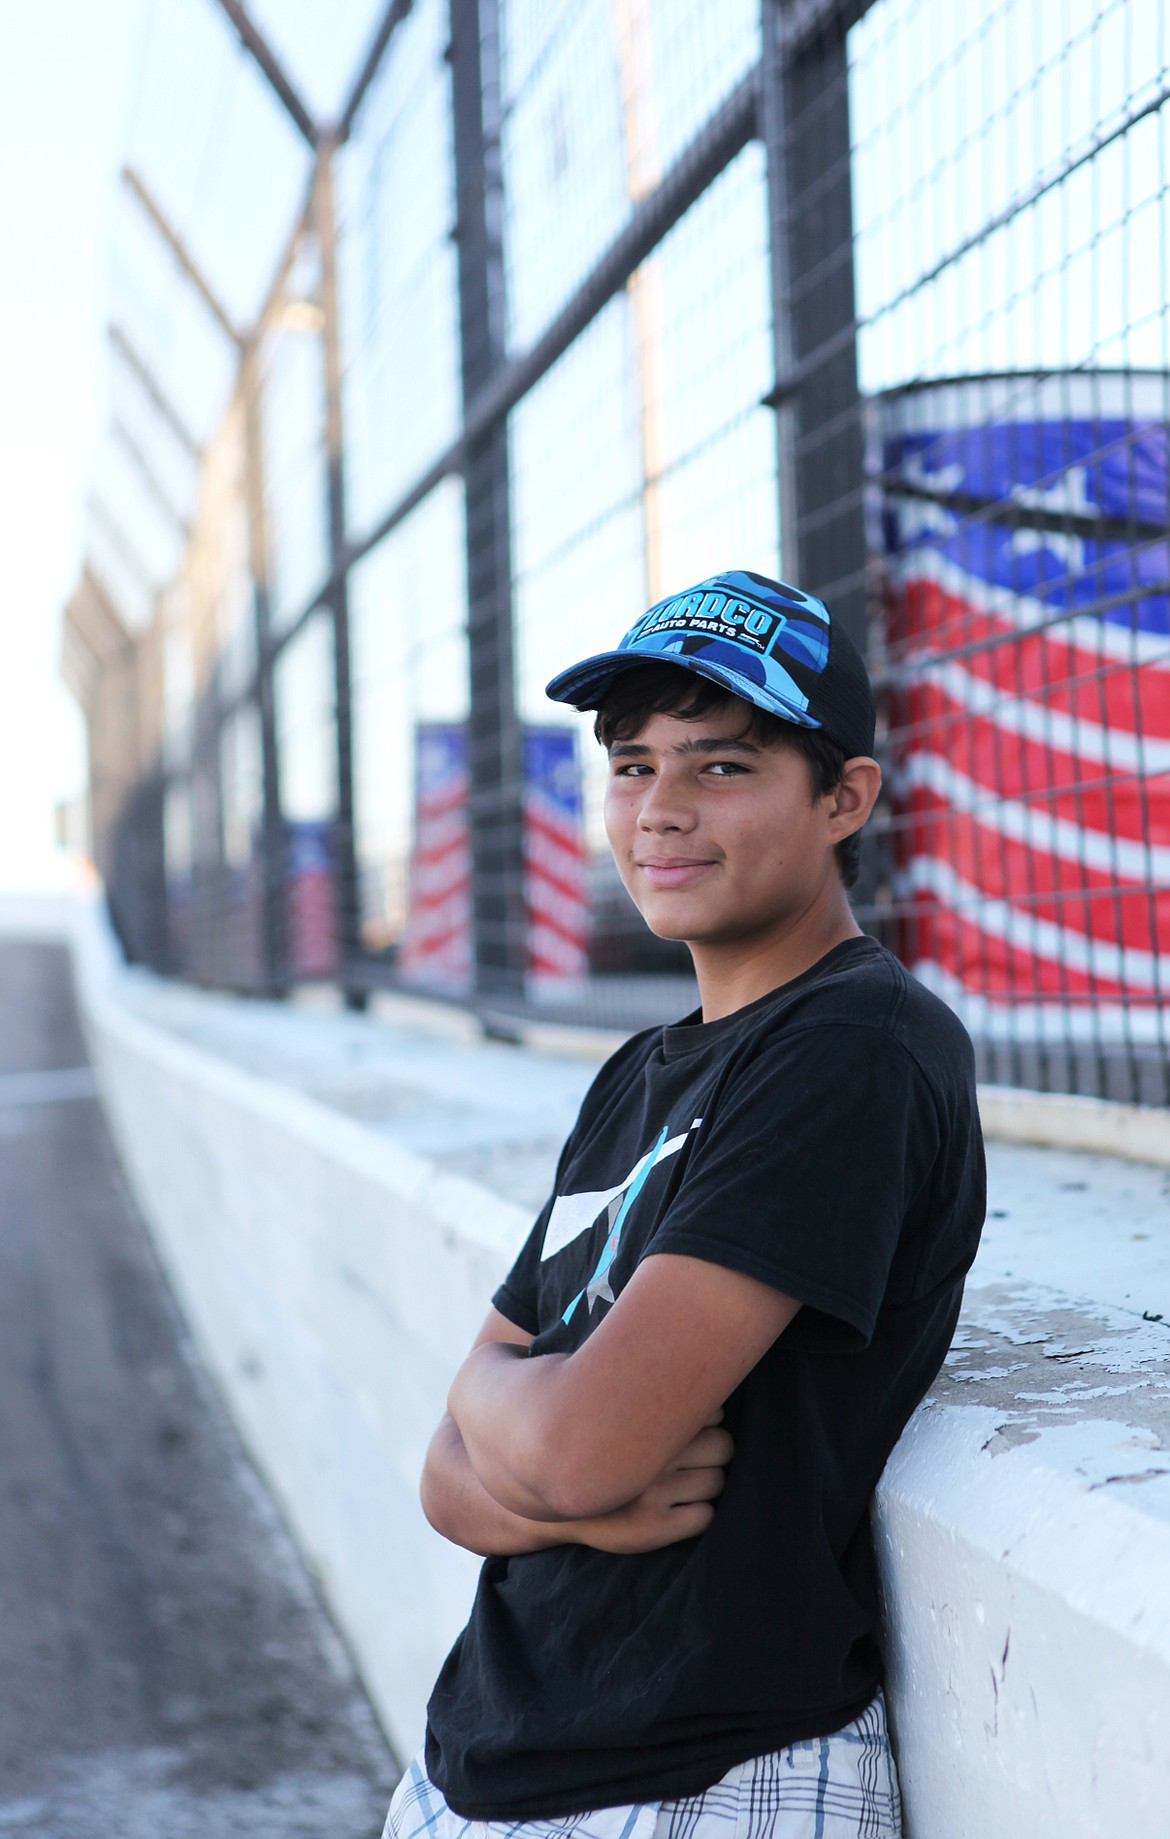 Dustin Mitchell, 14, looks out over the track at Montana Raceway Park in Kalispell. He was diagnosed with Type 1 diabetes as a 9-year-old, but hasn&#146;t let his condition stop him from chasing his dreams of auto racing. (Mackenzie Reiss/Daily Inter Lake)